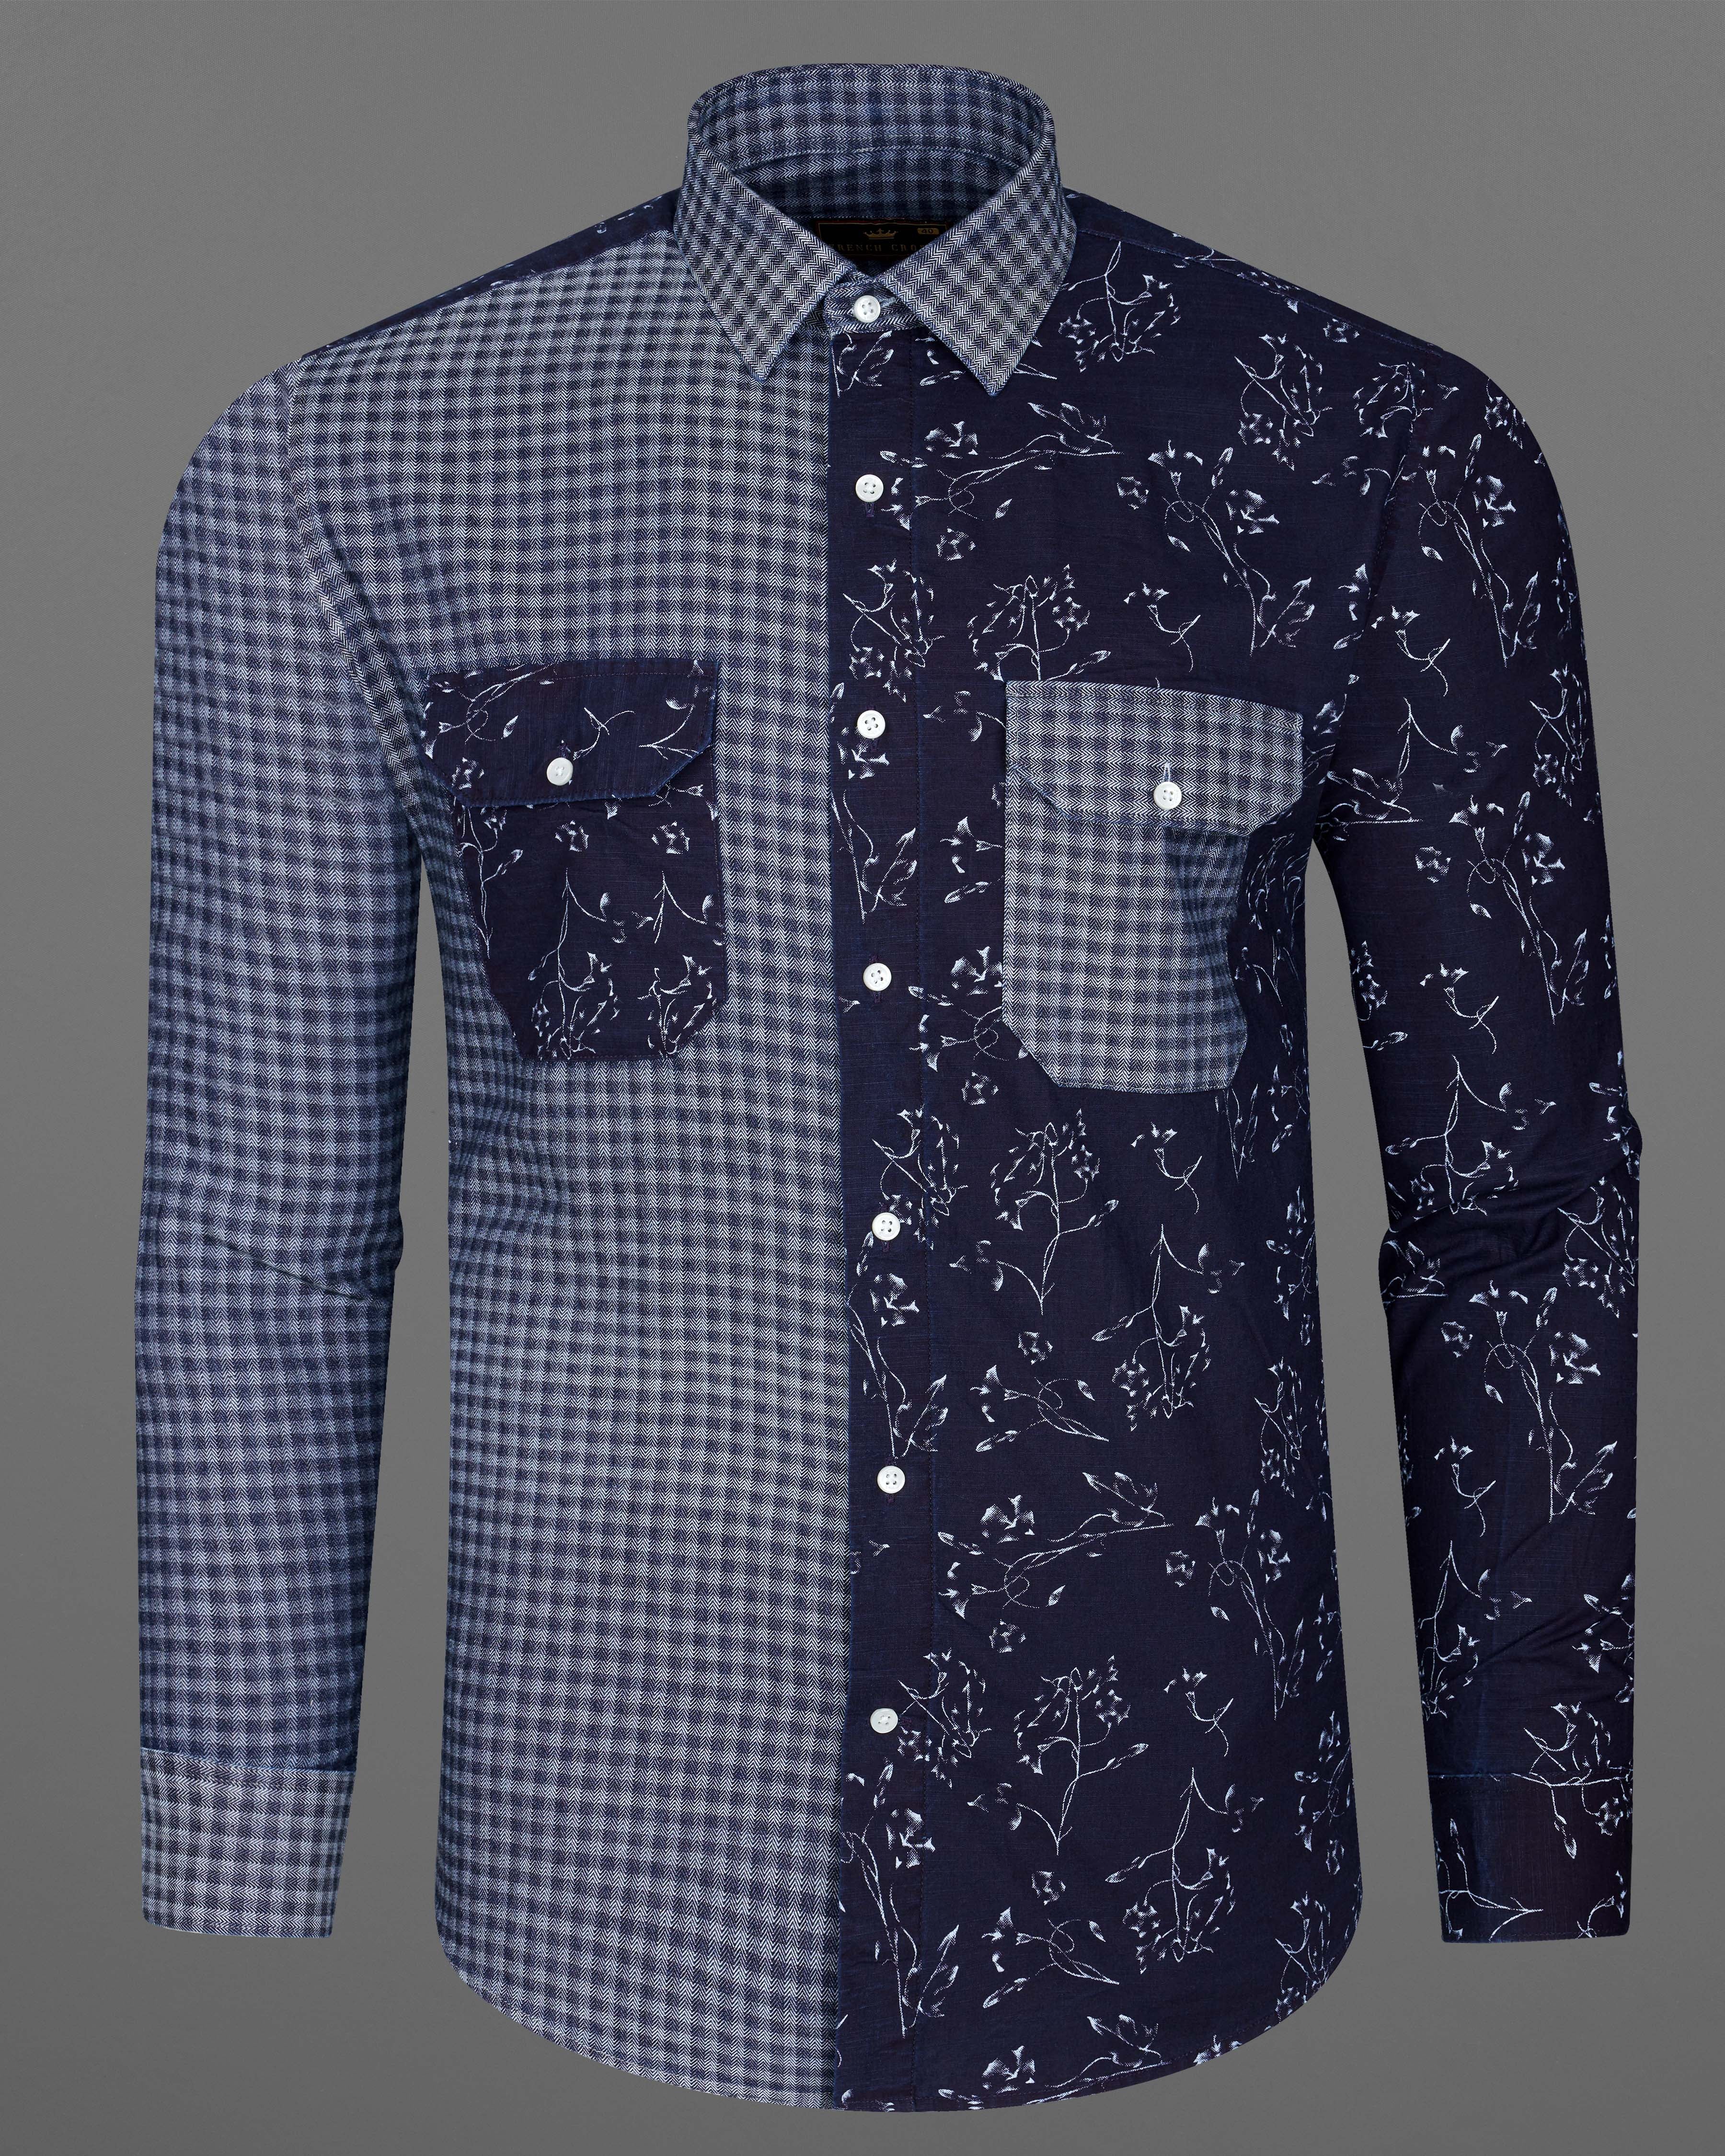 Cedar Blue with Storm Gray Gingham Printed Herringbone Designer Shirt  8704-P170-38,8704-P170-H-38,8704-P170-39,8704-P170-H-39,8704-P170-40,8704-P170-H-40,8704-P170-42,8704-P170-H-42,8704-P170-44,8704-P170-H-44,8704-P170-46,8704-P170-H-46,8704-P170-48,8704-P170-H-48,8704-P170-50,8704-P170-H-50,8704-P170-52,8704-P170-H-52